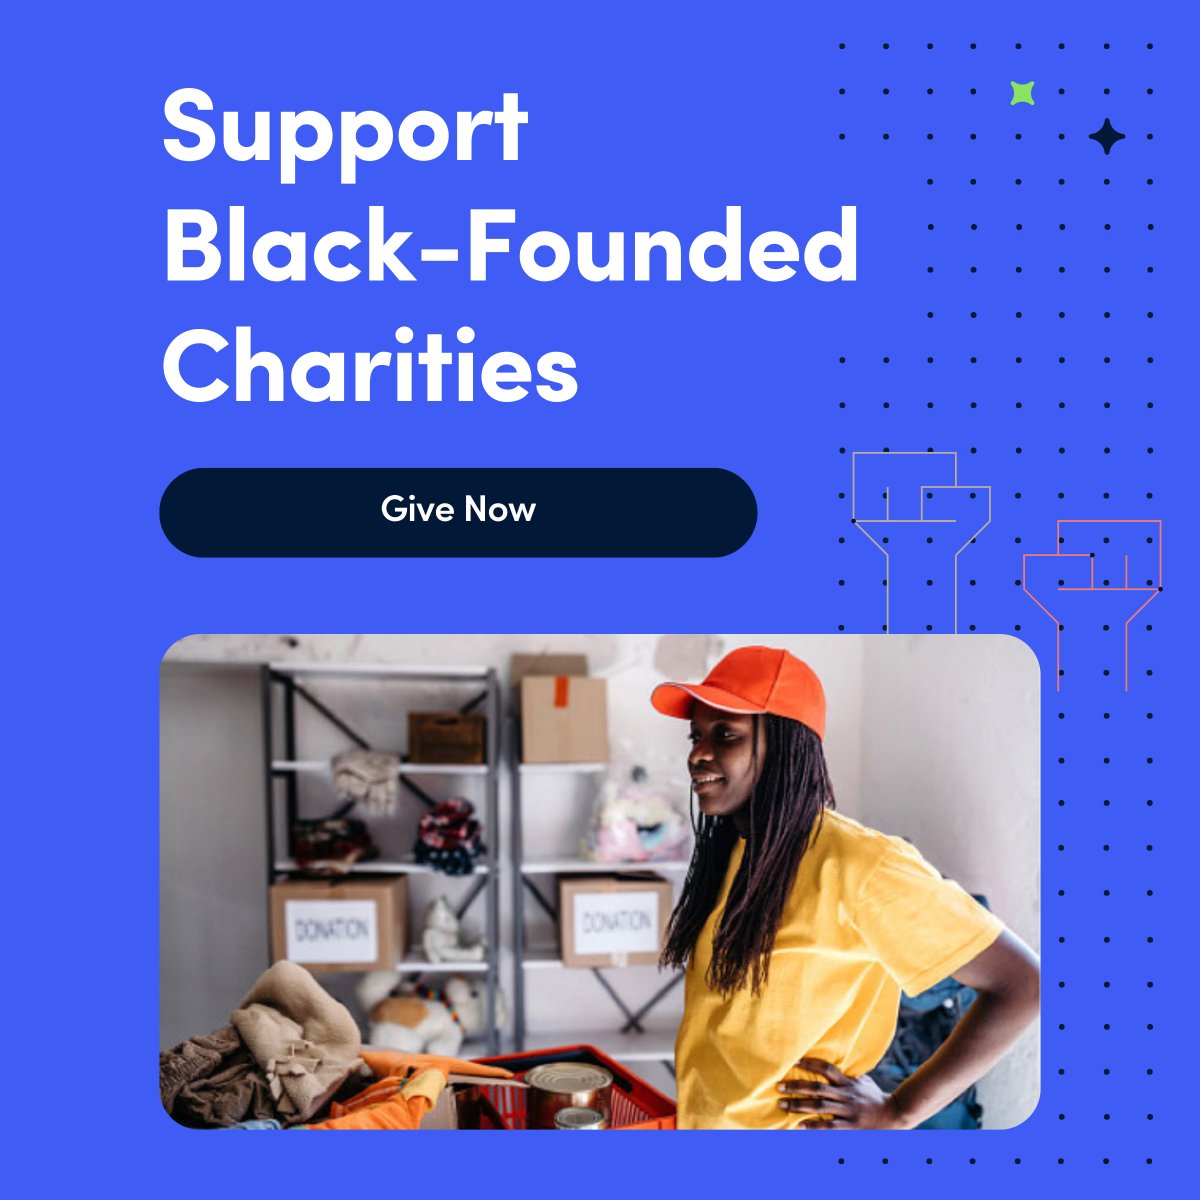 We're proud to partner with nonprofit, @GivingGap, to help amplify and raise awareness for Black-founded organizations. Consider supporting a charity from our Best Charities list today: cnvgt.org/blackfounded. #BHM #BlackHistoryMonth #4Charity